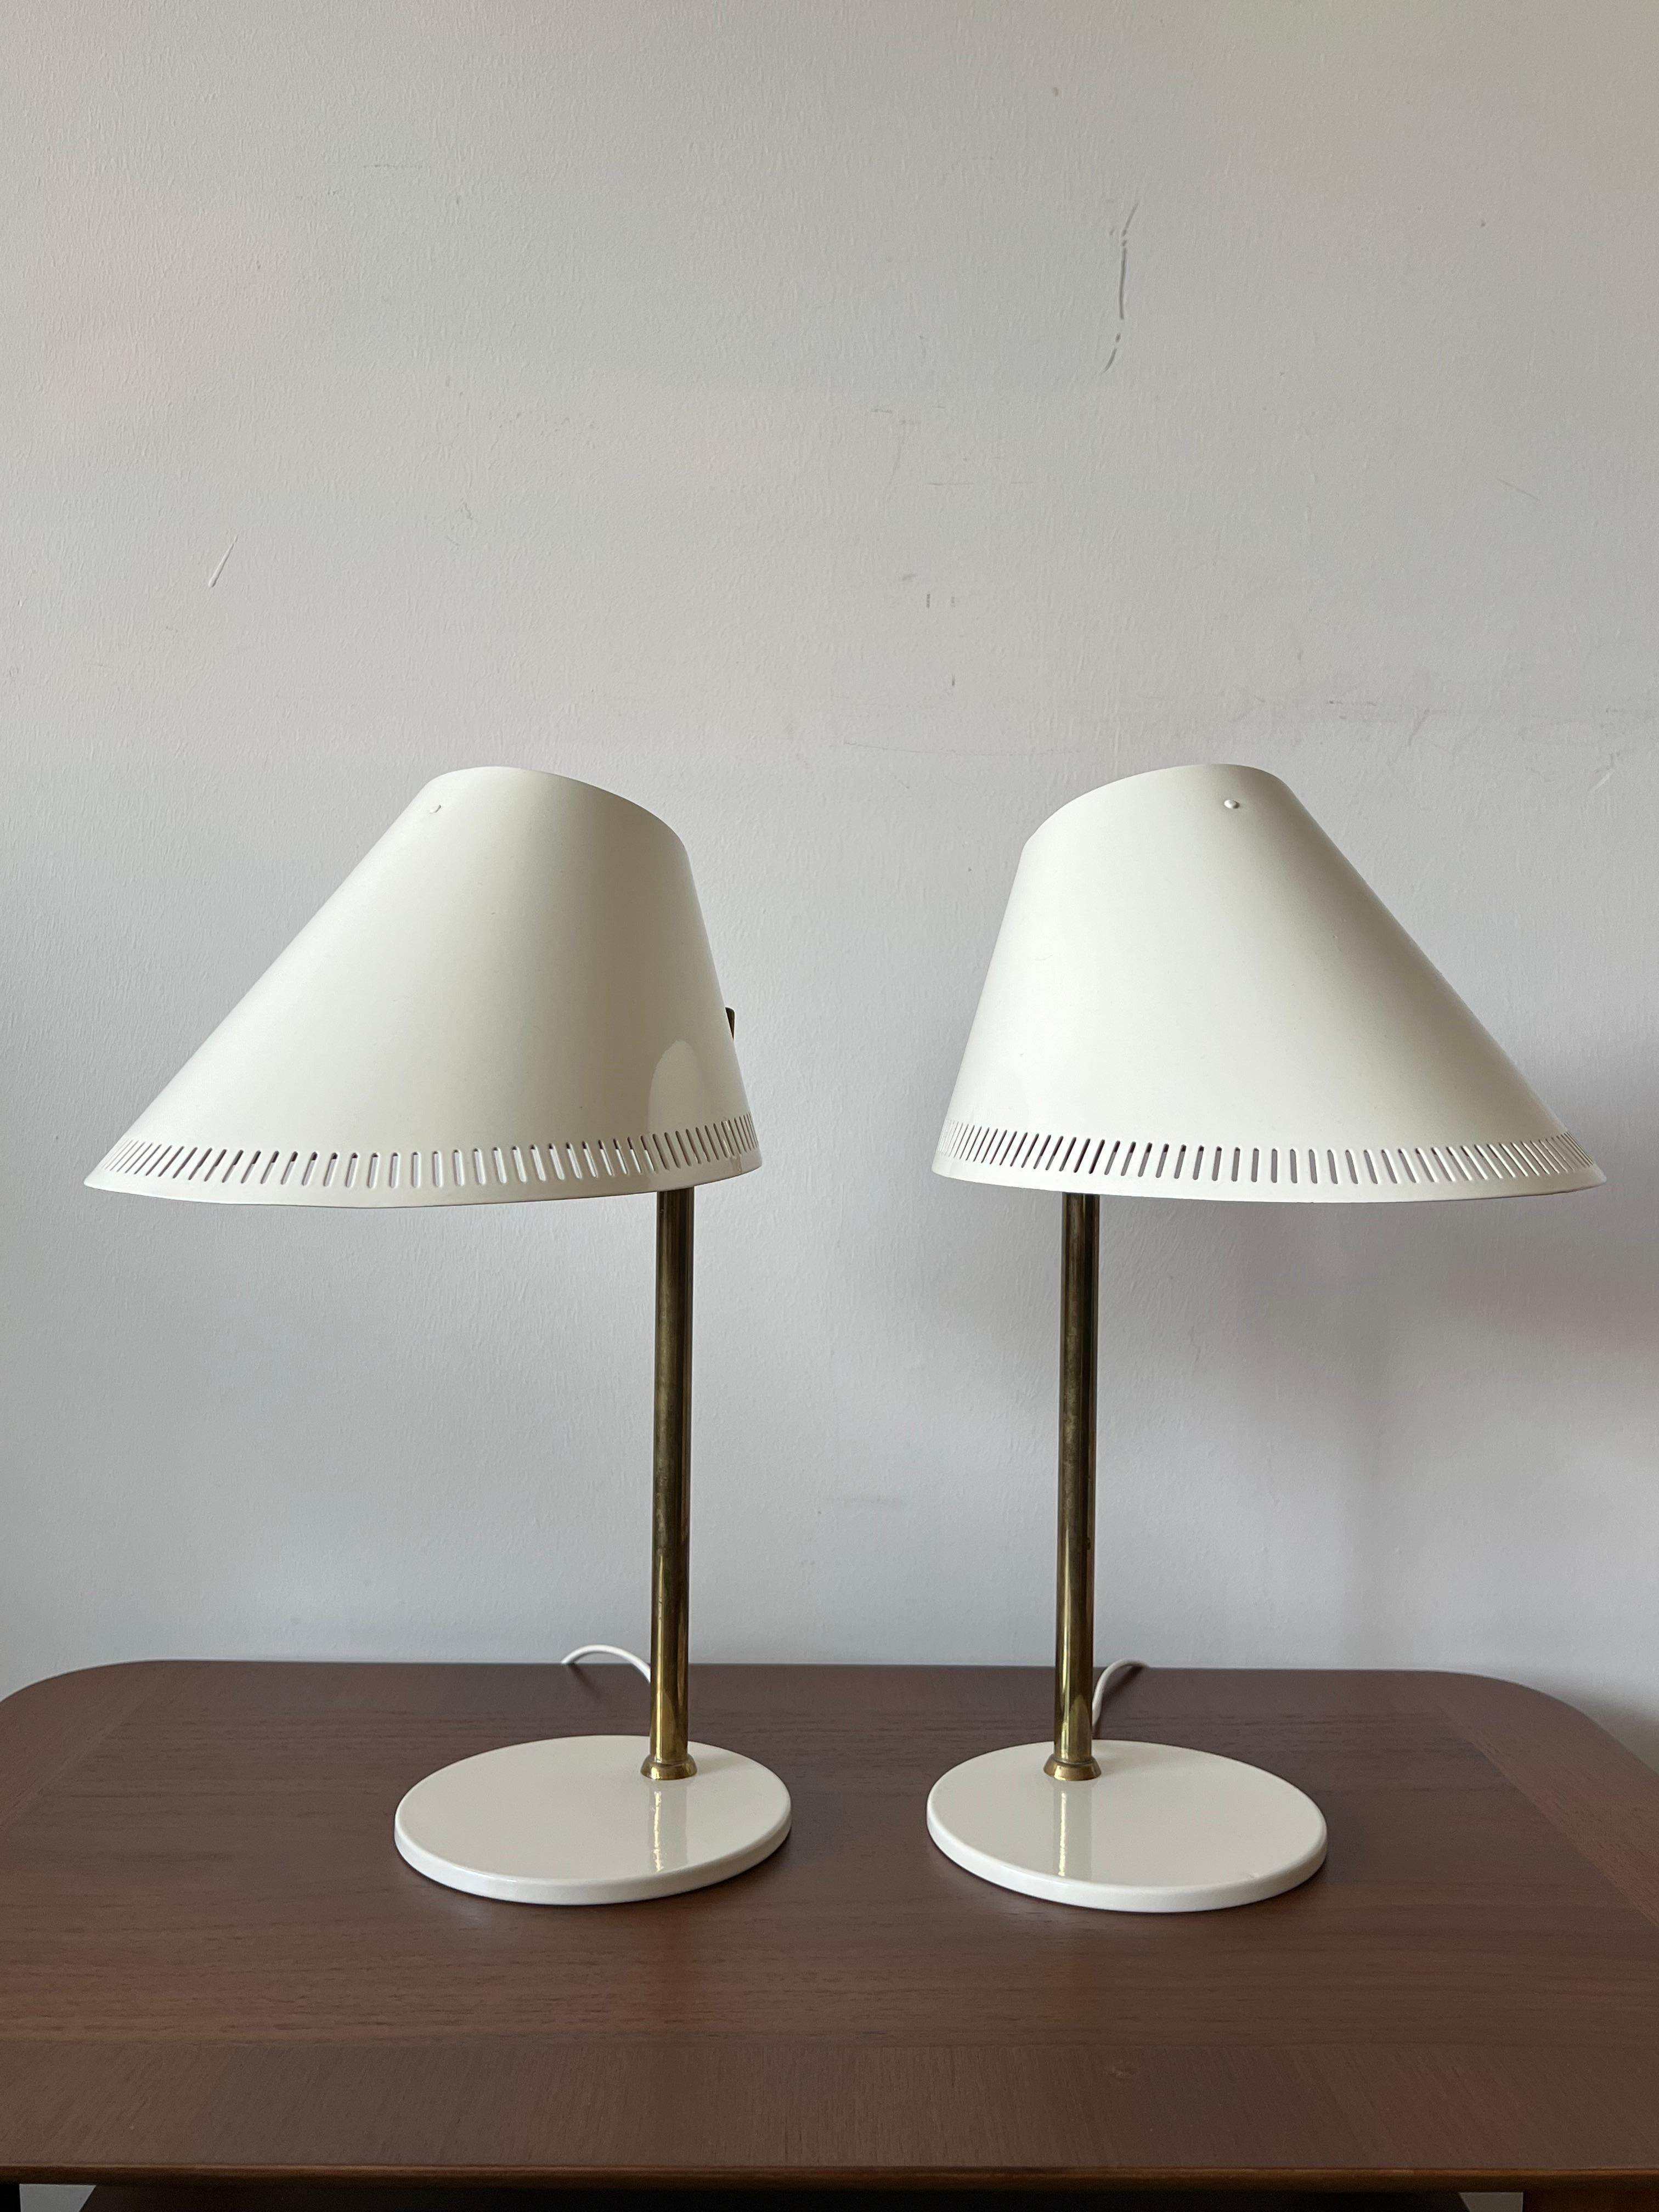 A pair of table lamps, model 9227 by Paavo Tynell designed for Idman/Taito, circa 1950s. Repowder coated, cream color enamel paint, brass, aluminium and steel construction.